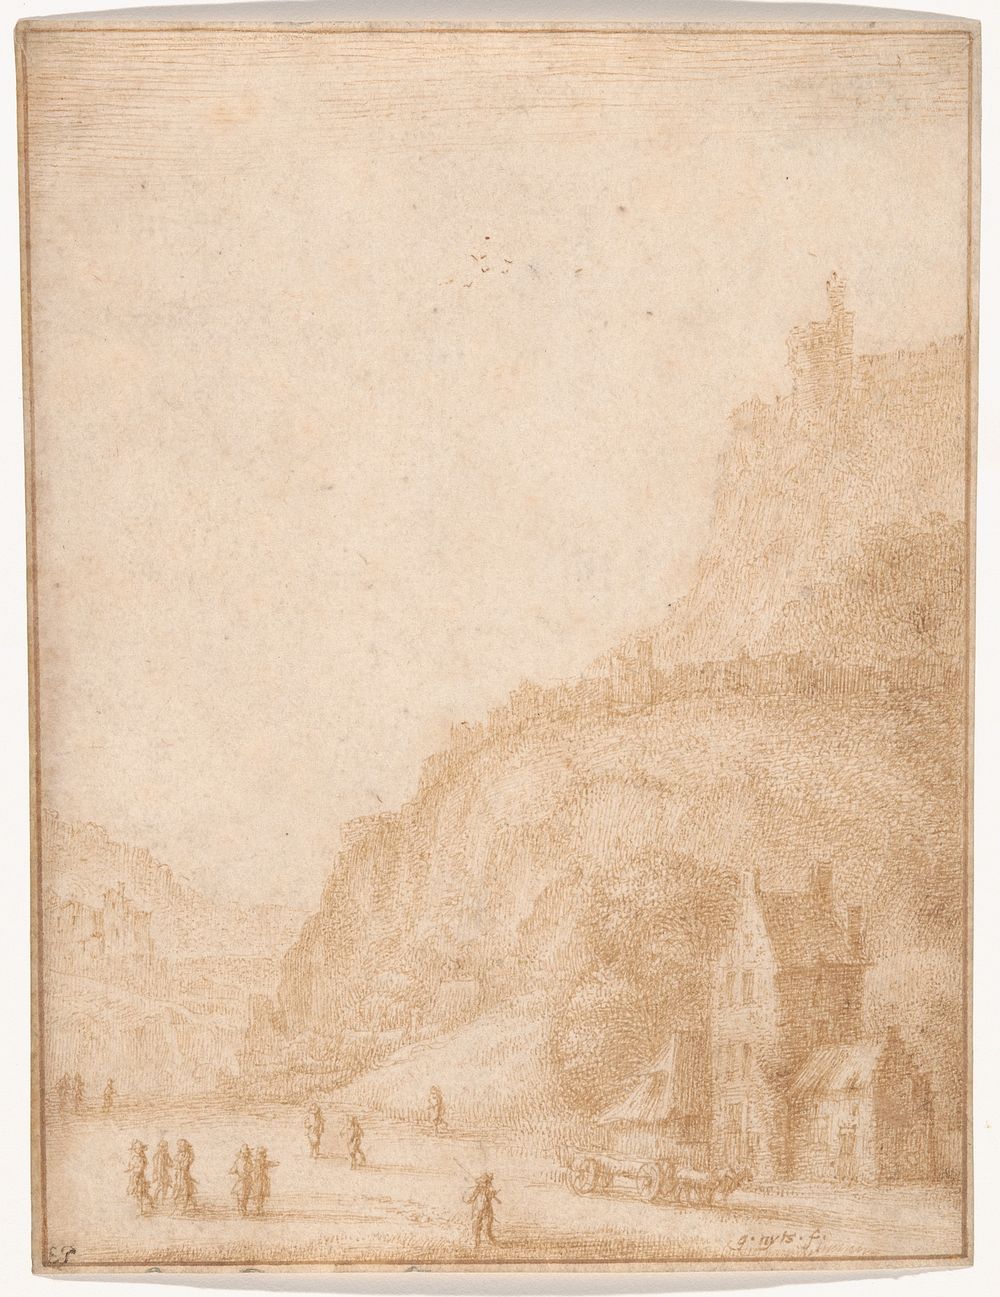 Landscape with Figures and Horses in the Foreground by Gillis Neyts